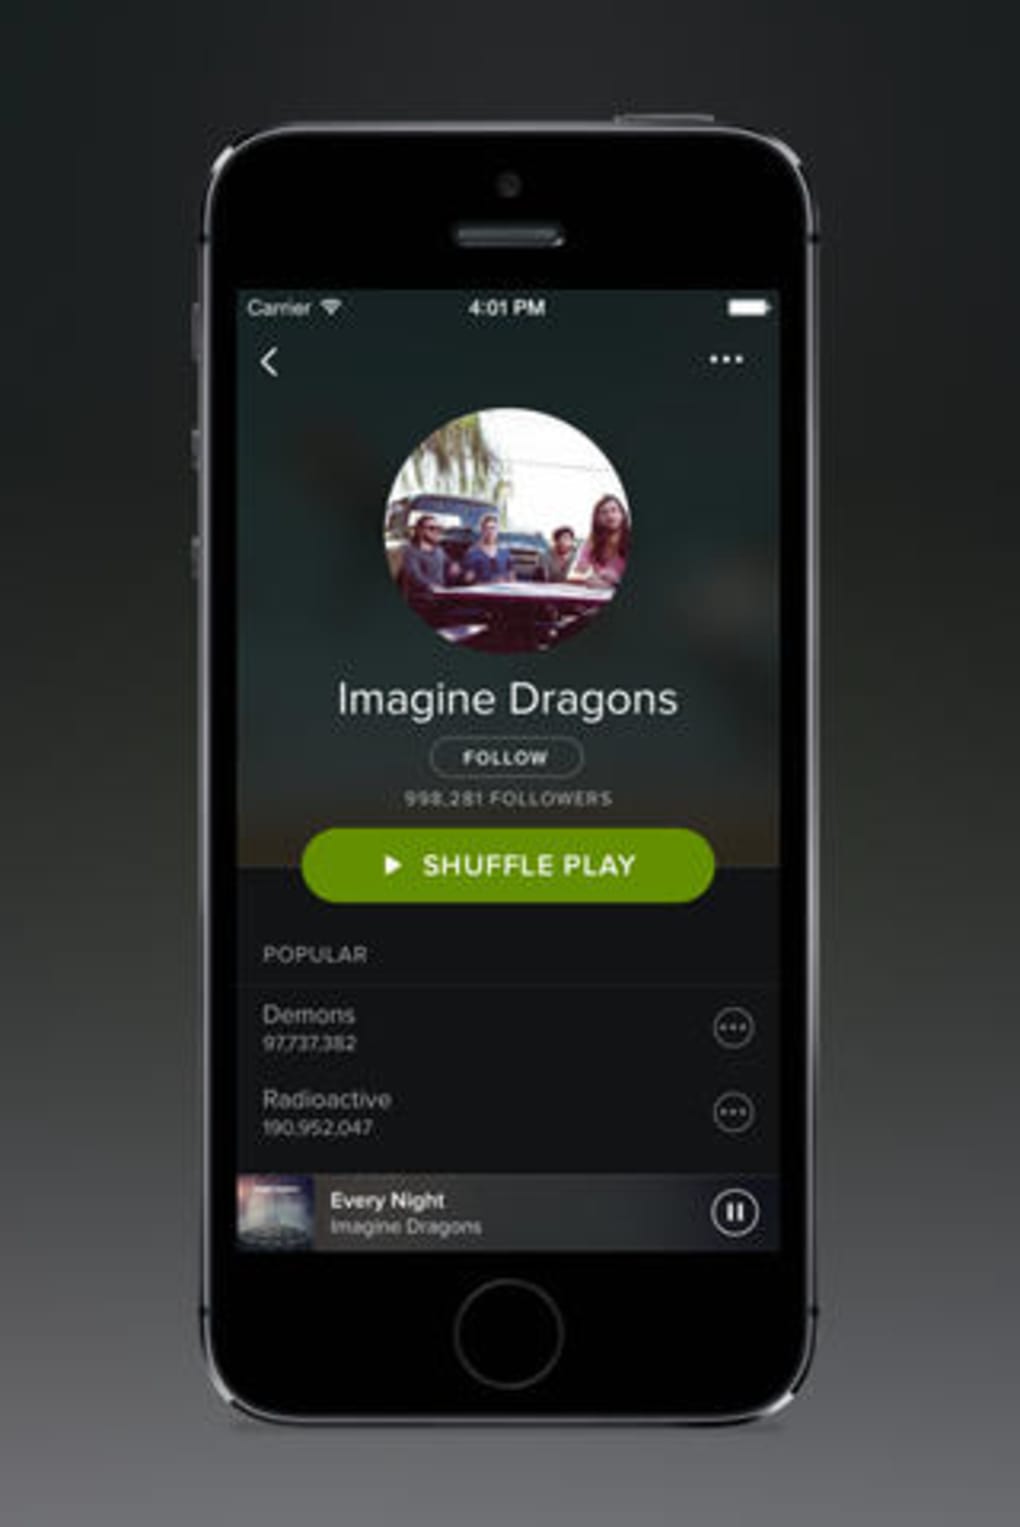 Spotify ipad app download song